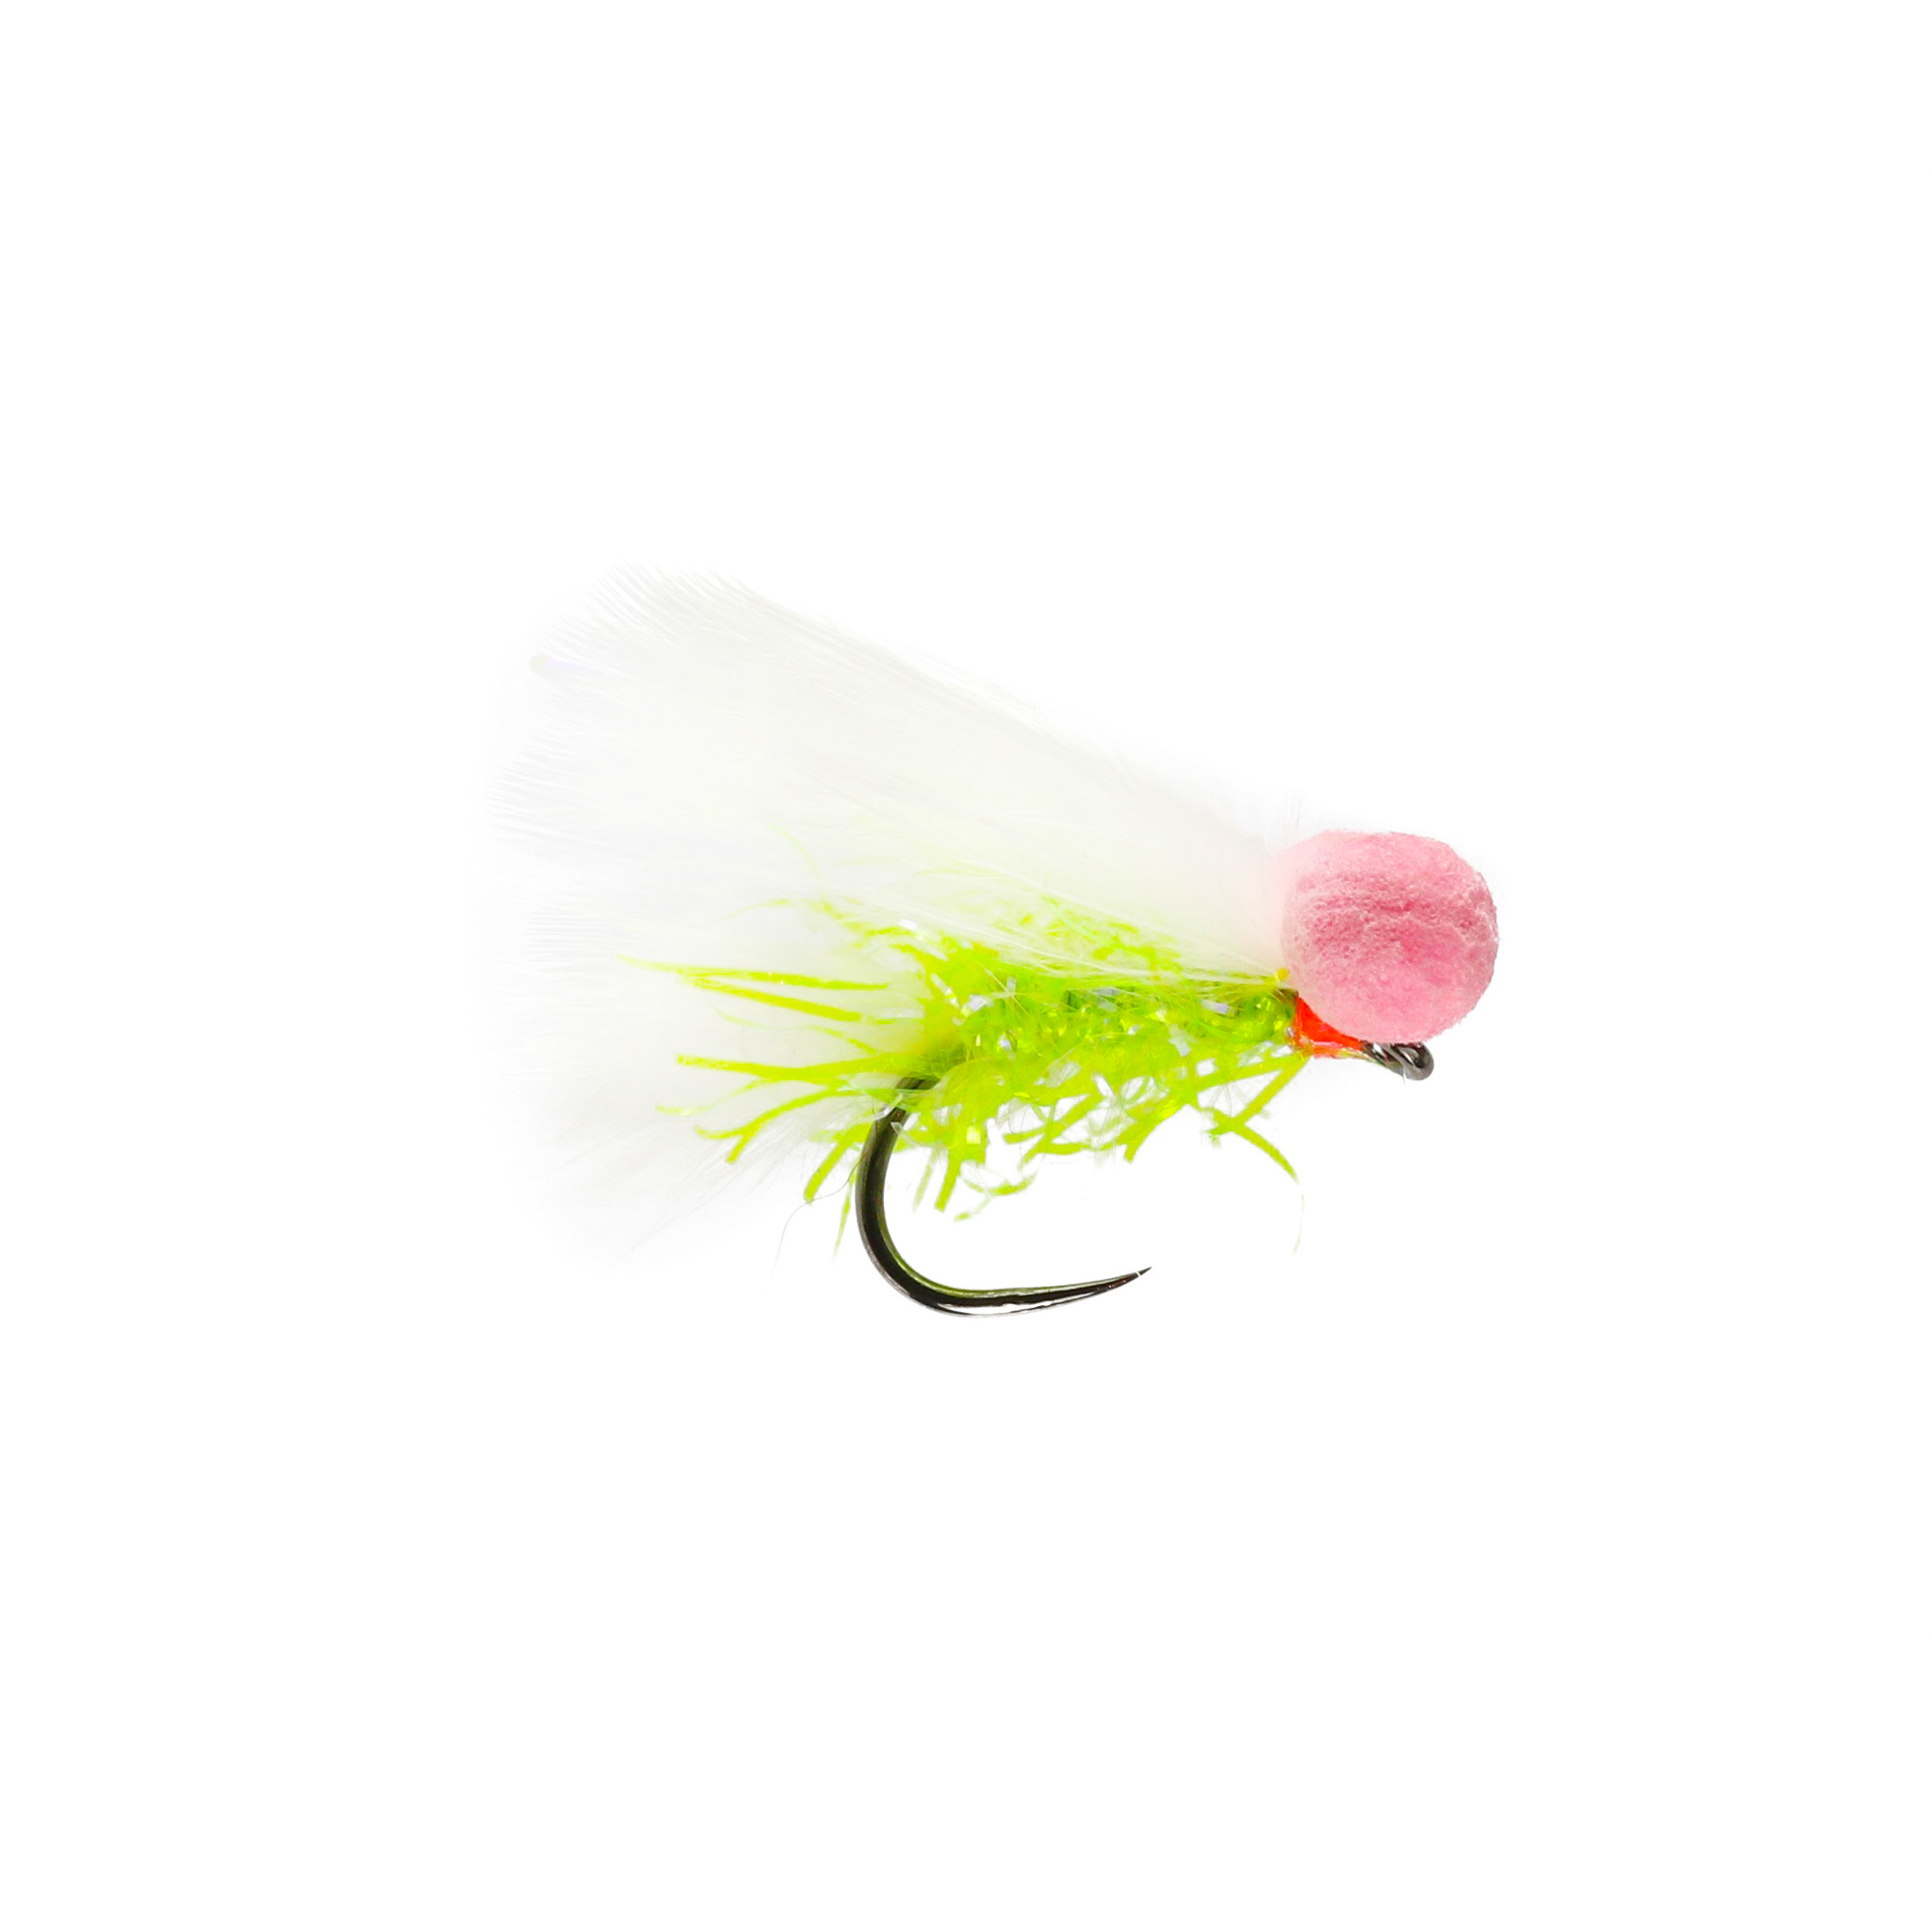 Caledonia Woofter Booby B/L – Guide Flyfishing